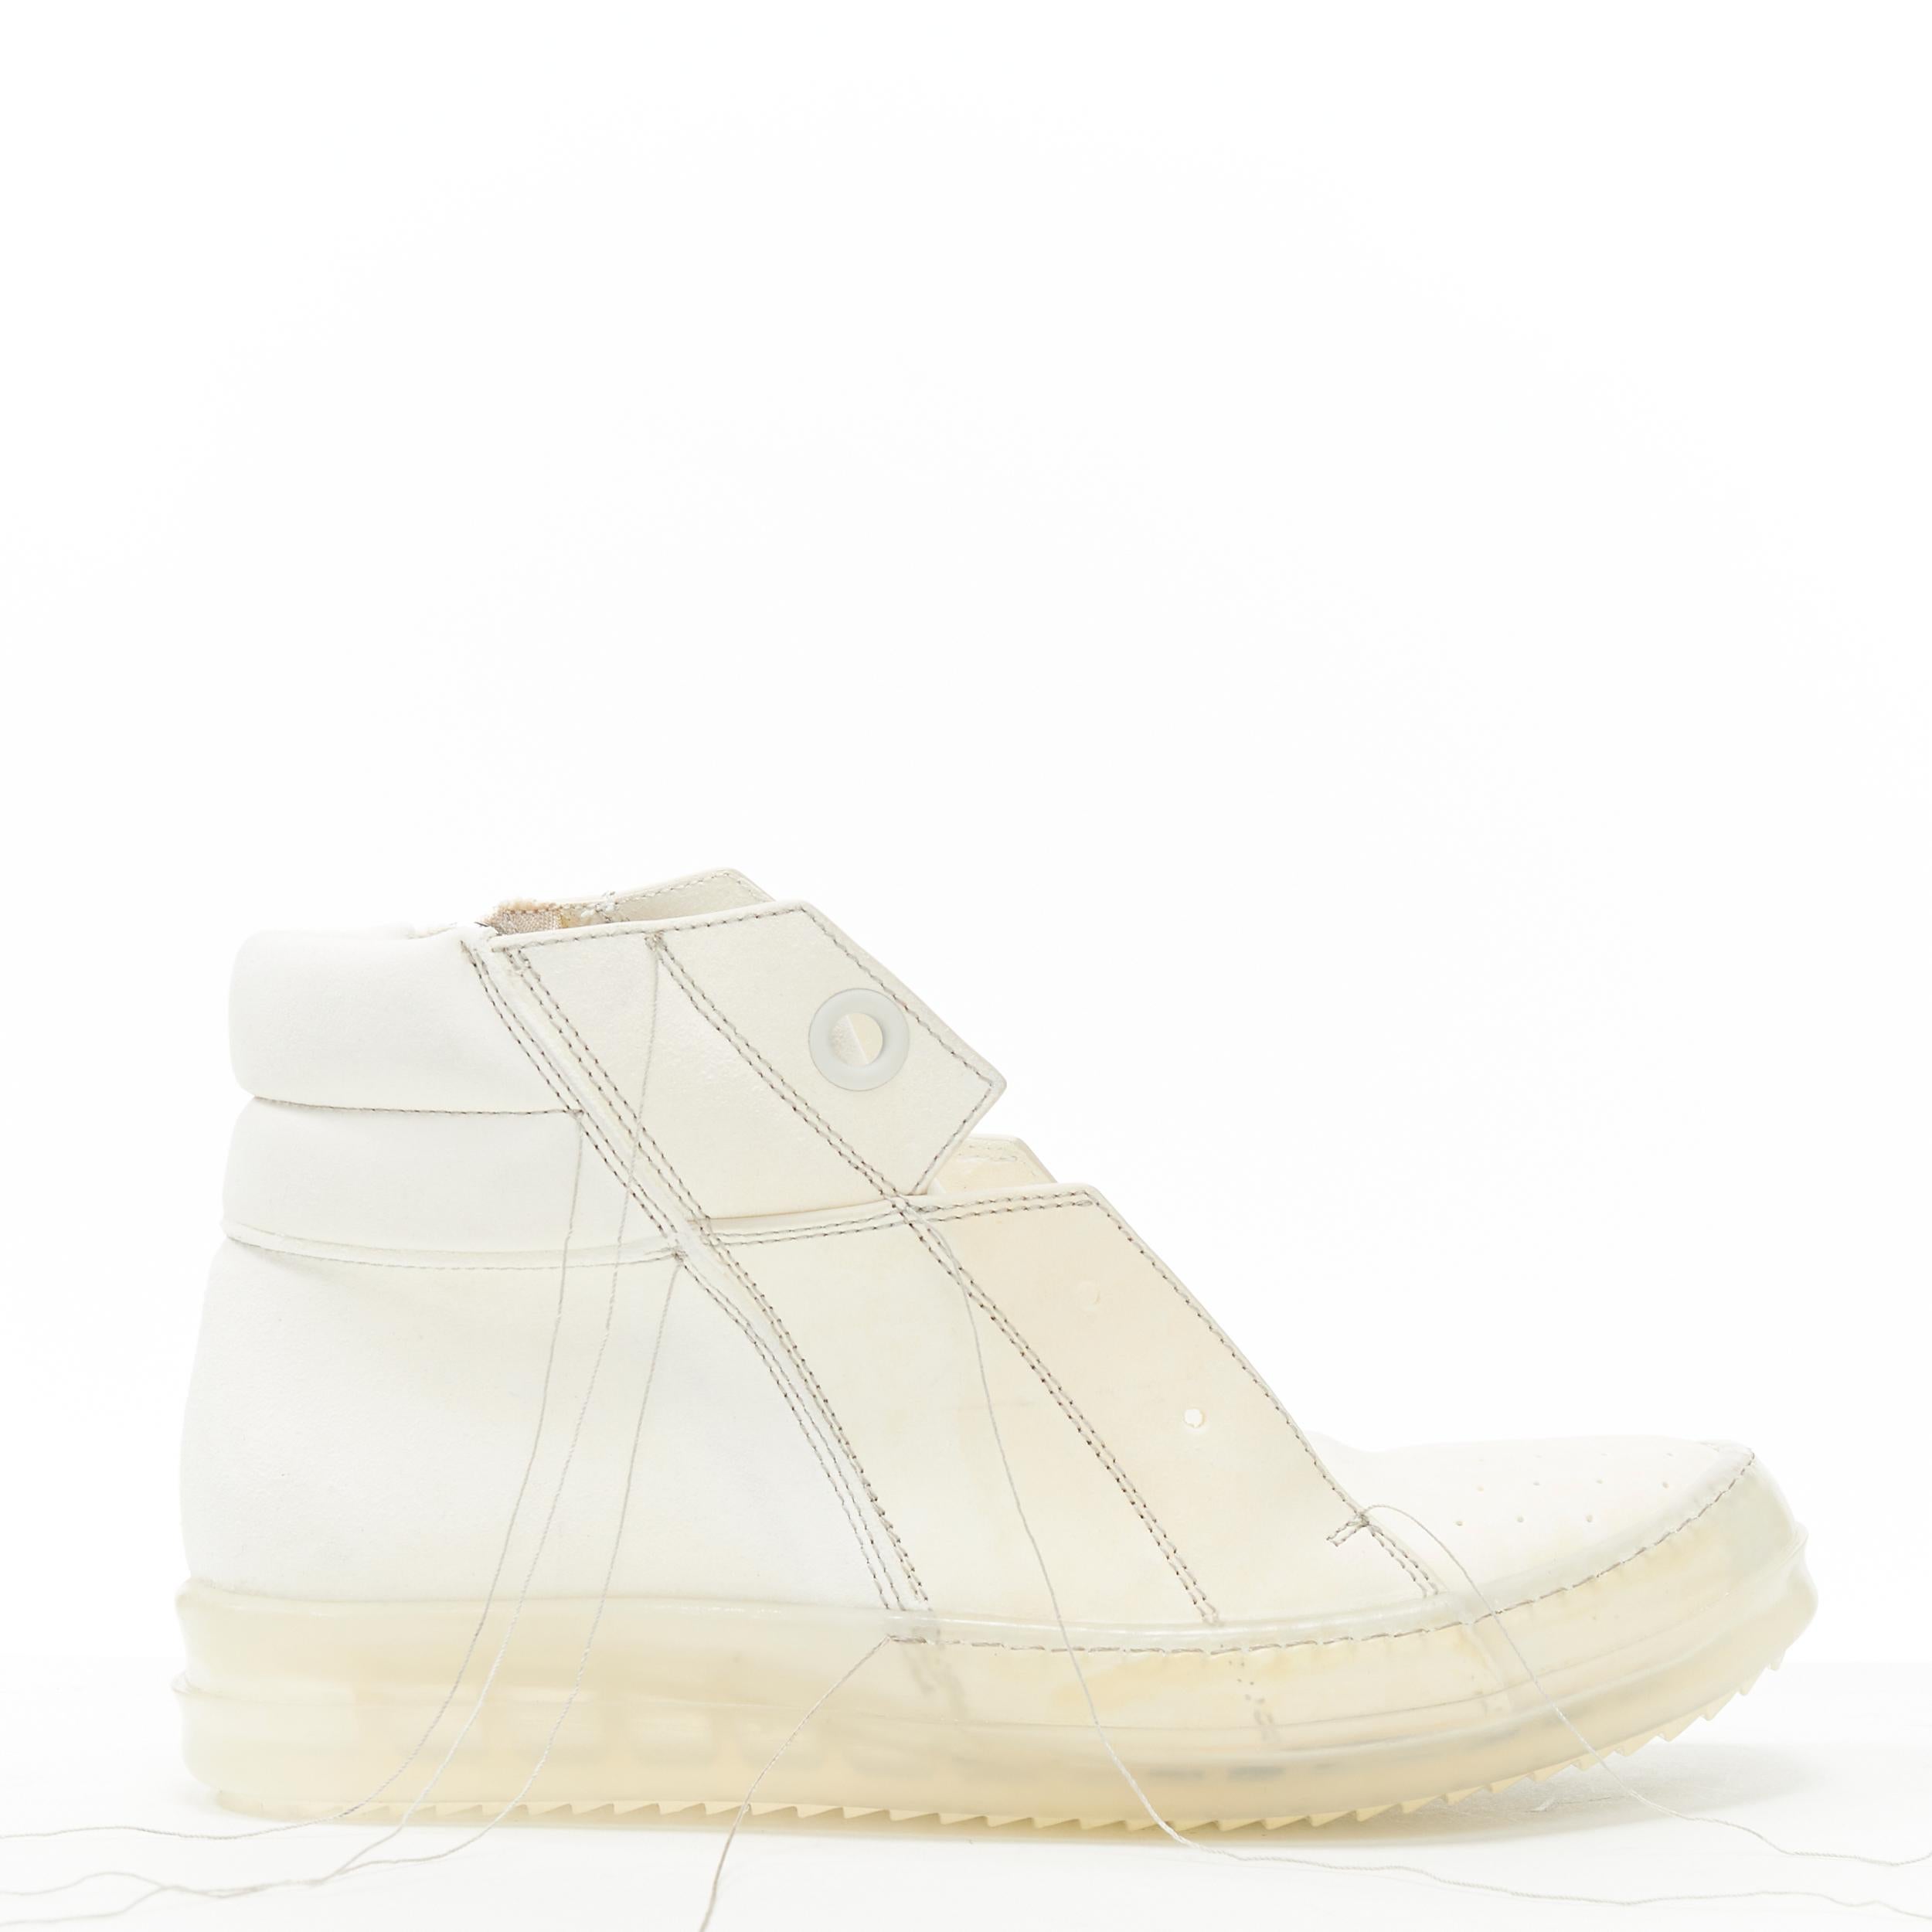 new RICK OWENS Island Dunk long thread distressed milk clear sole dunk EU36.5 
Reference: TGAS/B01170 
Brand: Rick Owens 
Designer: Rick Owens 
Model: Island Dunk Milk 
Material: Leather 
Color: White 
Pattern: Solid 
Closure: Lace Up 
Extra Detail: